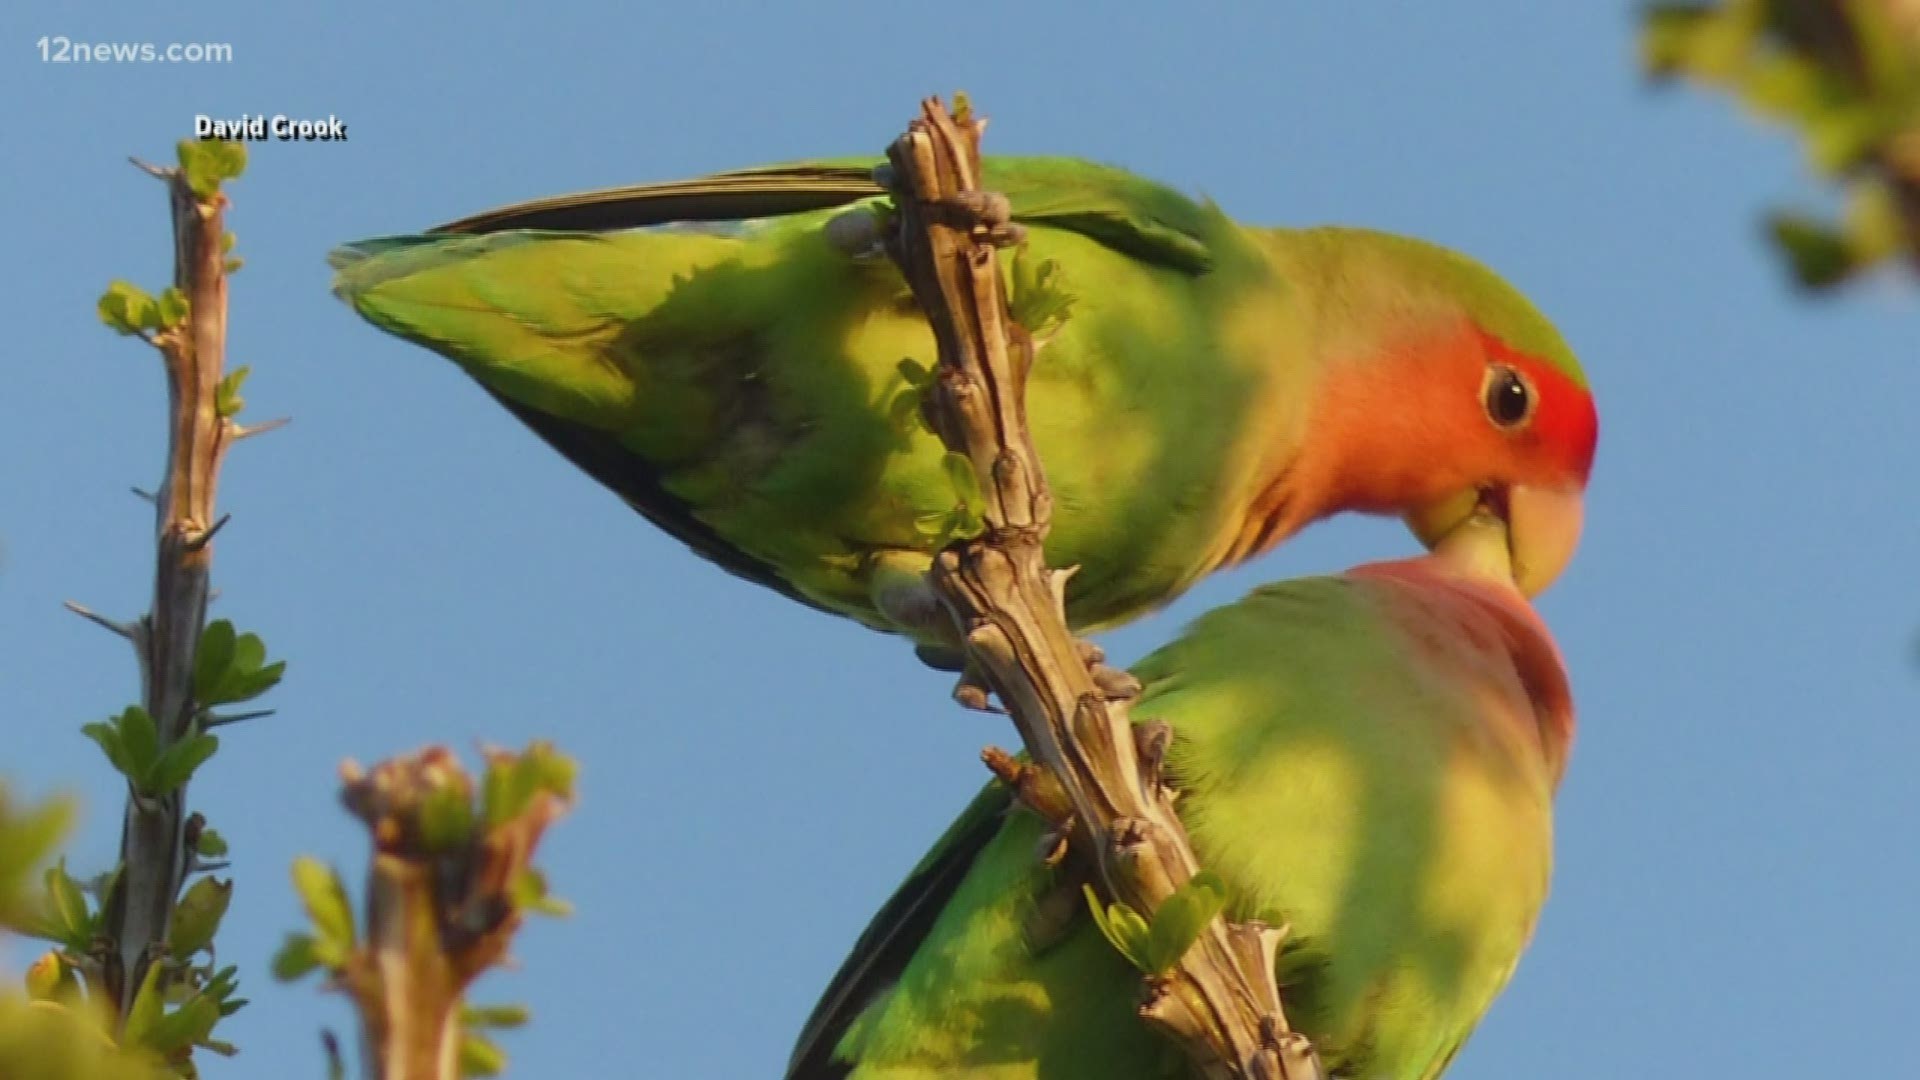 Our 12 News Weather Watcher, David Crook, took some great pics of lovebirds in the Valley. You can join Weather Watchers by going to the 12 News Facebook page.